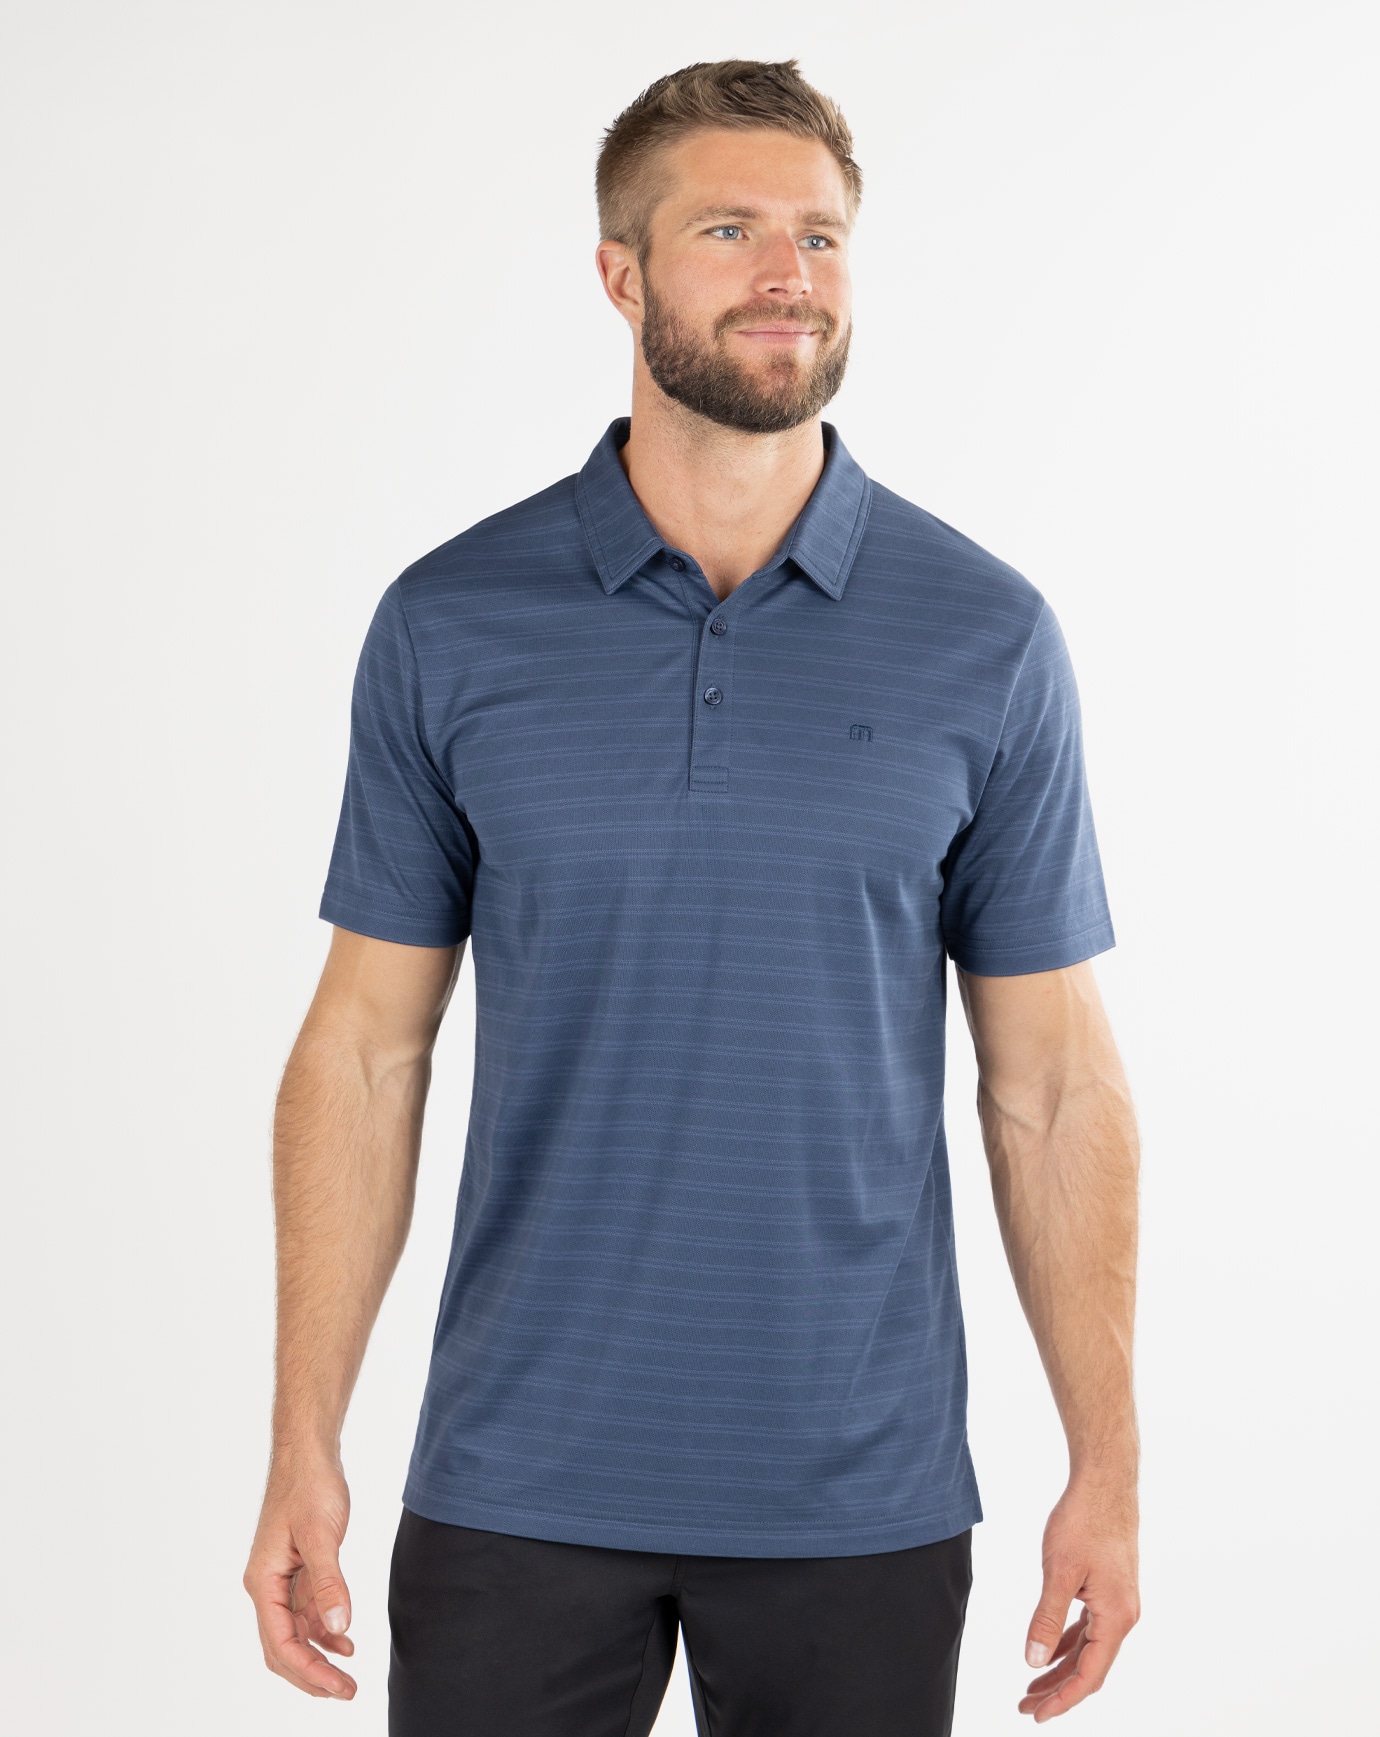 Related Product - HOIST THE SAILS POLO